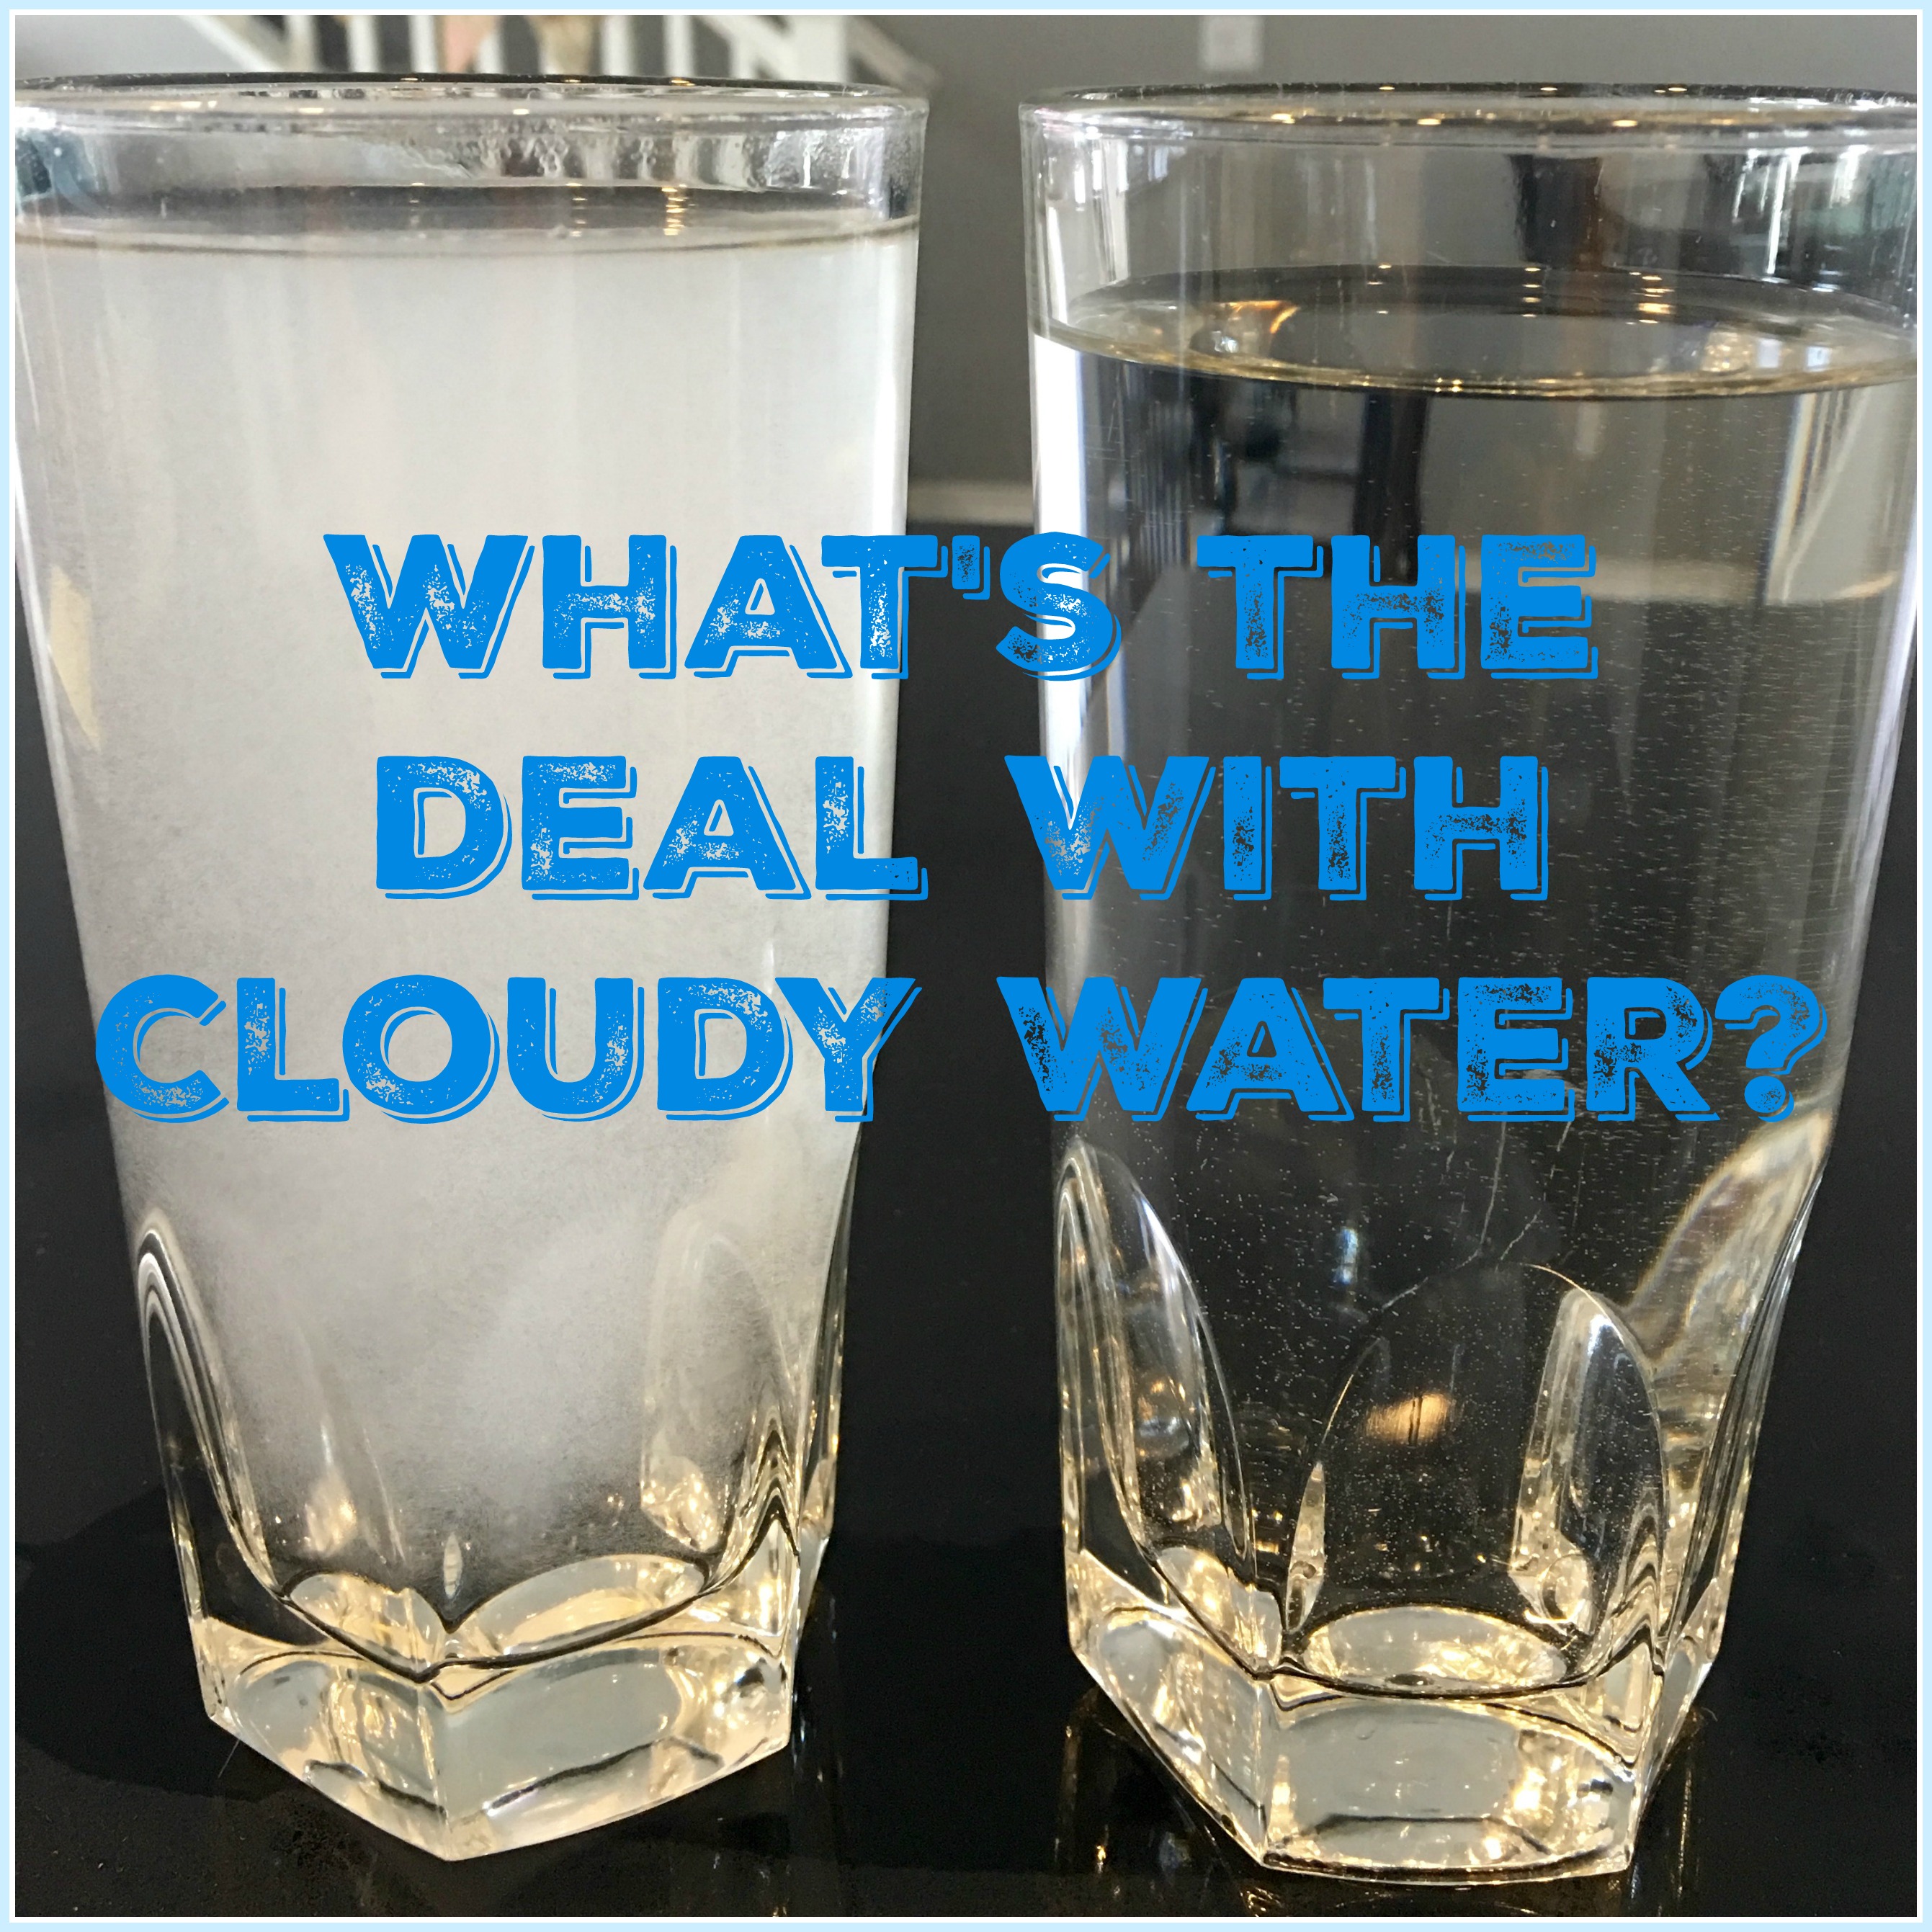 Drinking Water Week 2016: Why is the water sometimes cloudy?